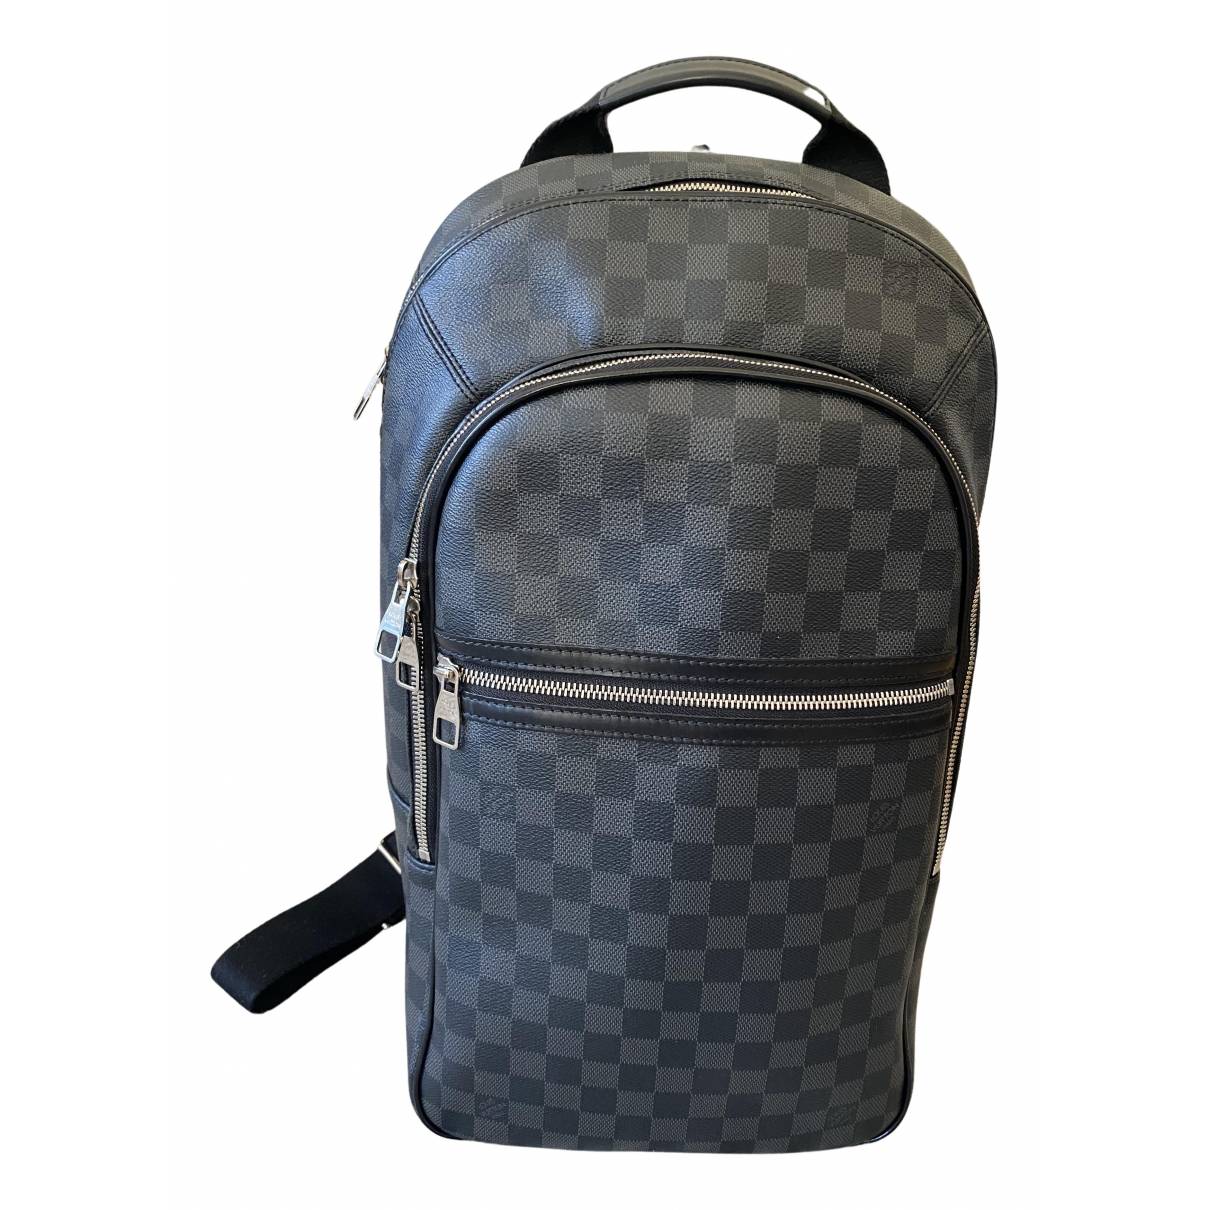 Michael backpack patent leather bag Louis Vuitton Black in Patent leather -  25967434